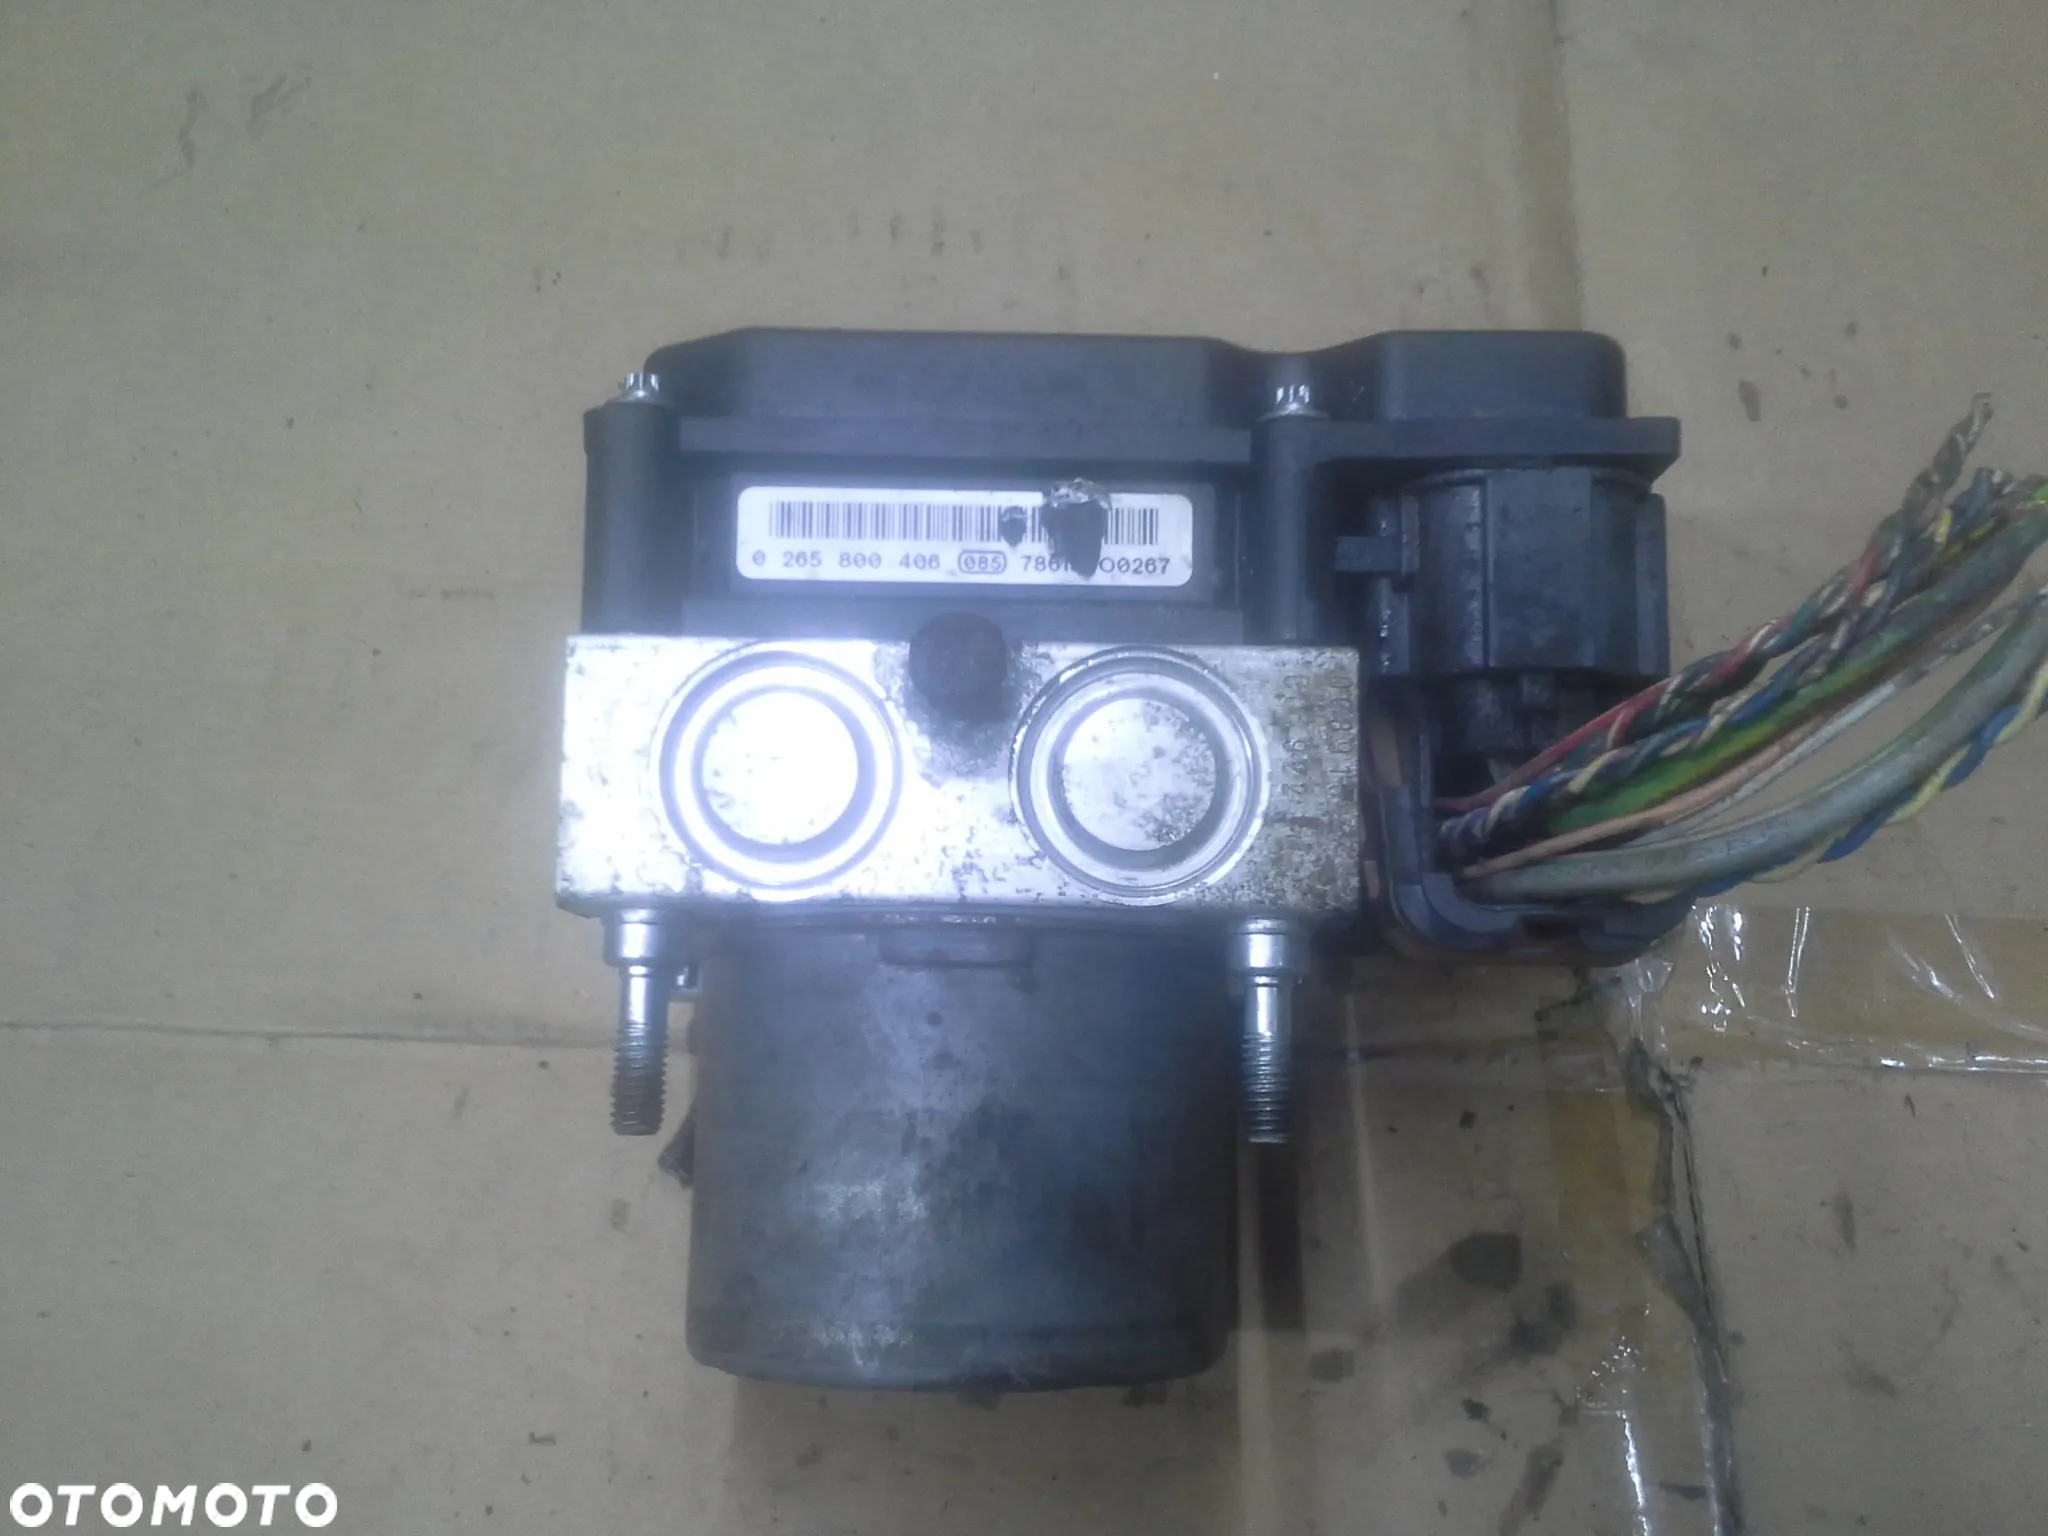 Peugeot 307 1.6 HDi pompa abs 9663345480 0265231508 - 11